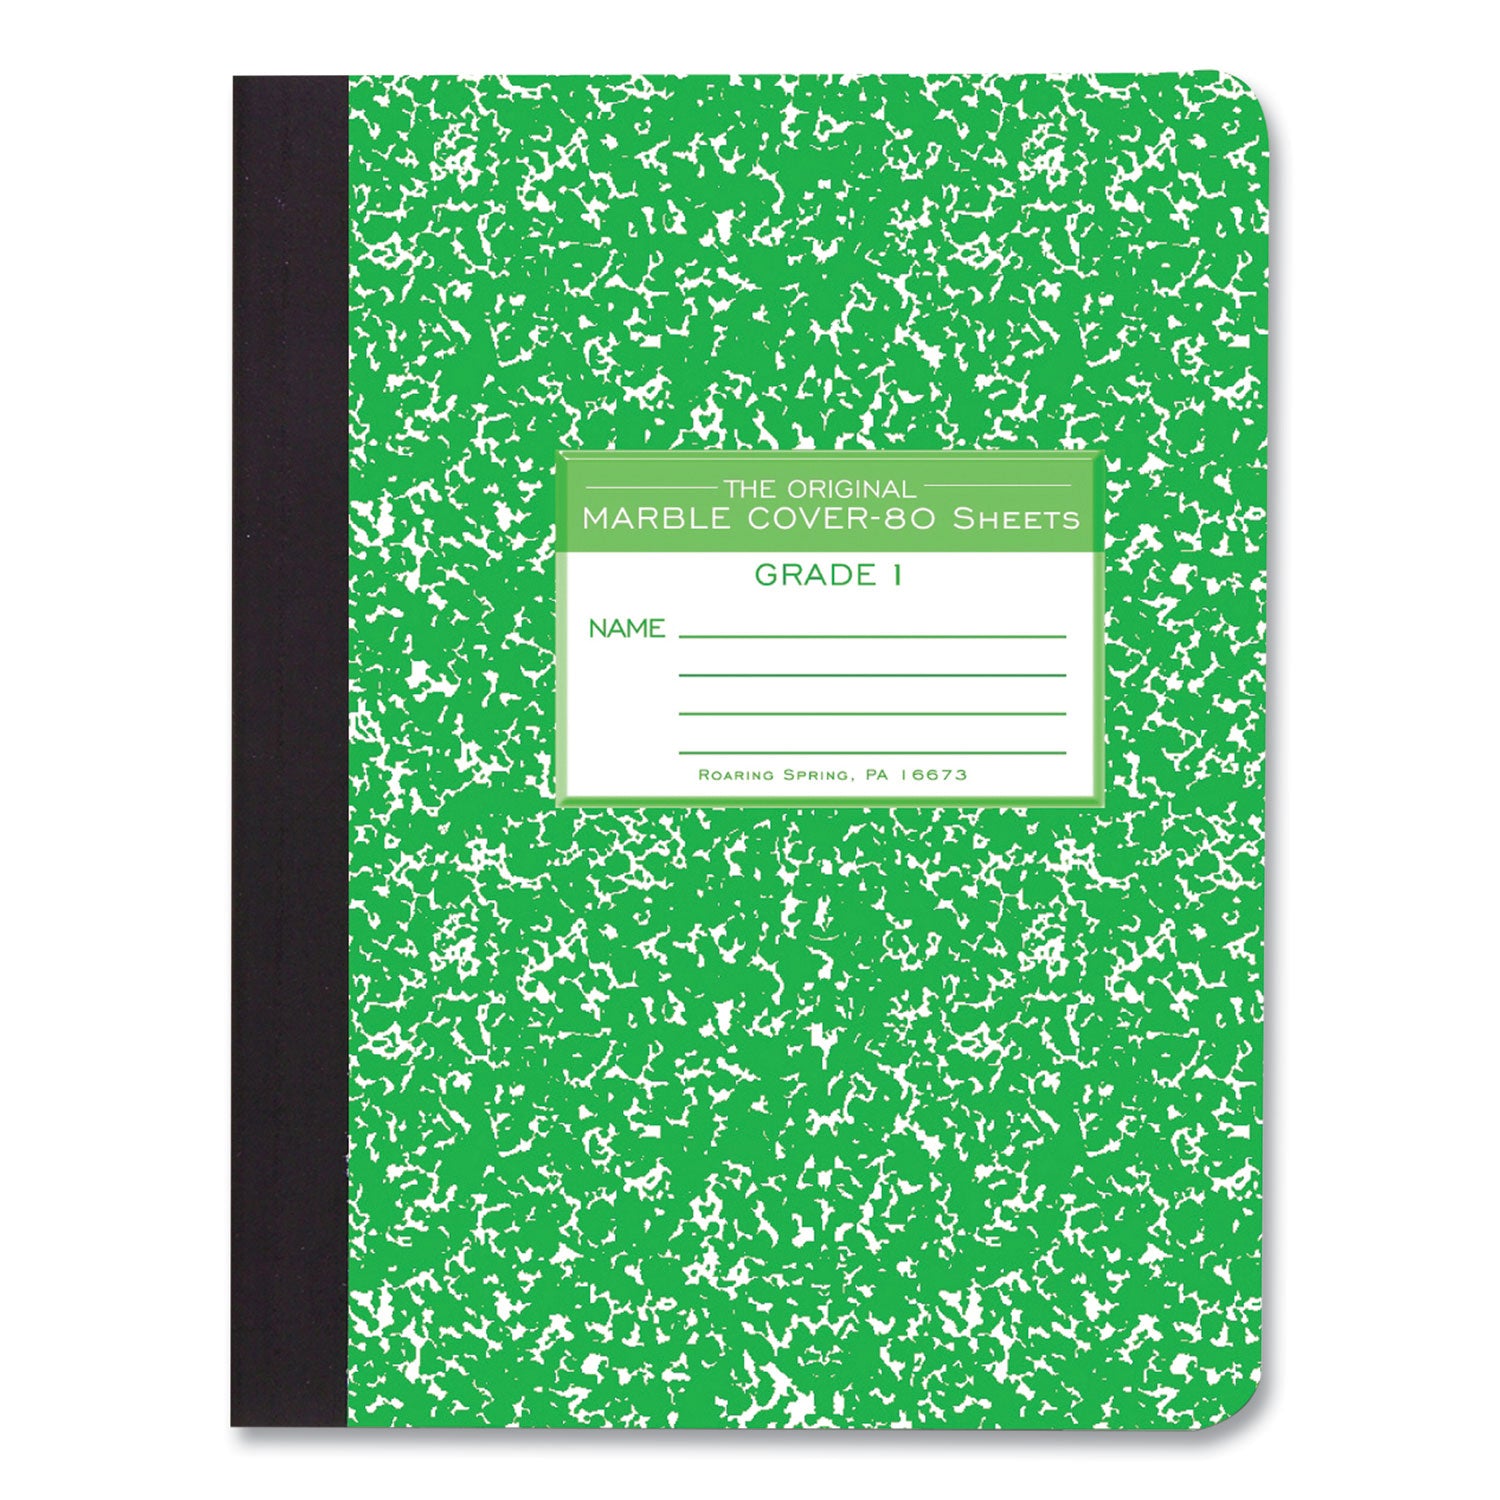 Ruled Composition Book, Grade 1 Manuscript Format, Green Marble Cover, (80) 9.75 x 7.5 Sheet, 48/CT, Ships in 4-6 Bus Days - 2